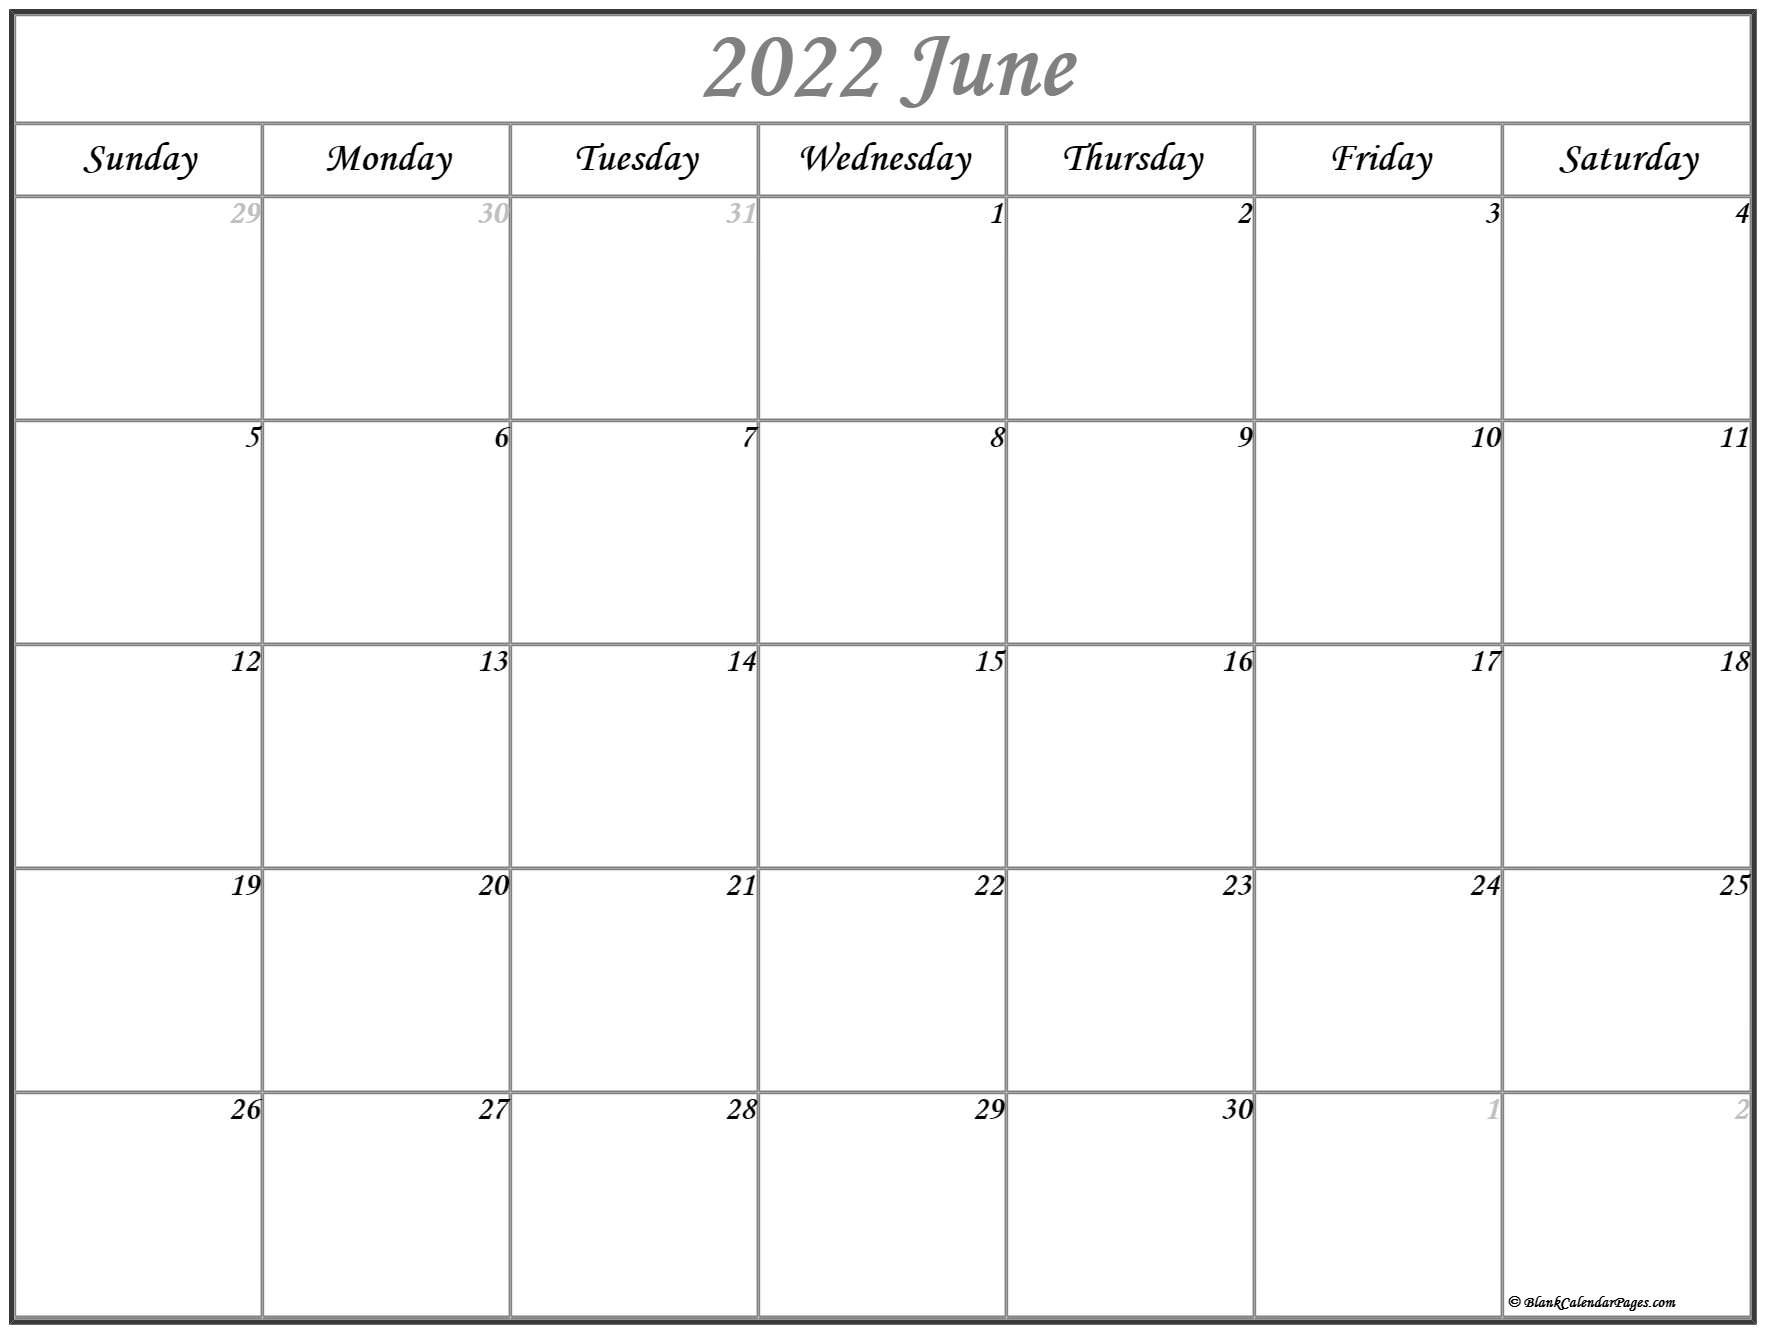 Catch Calendar 2022 May And June